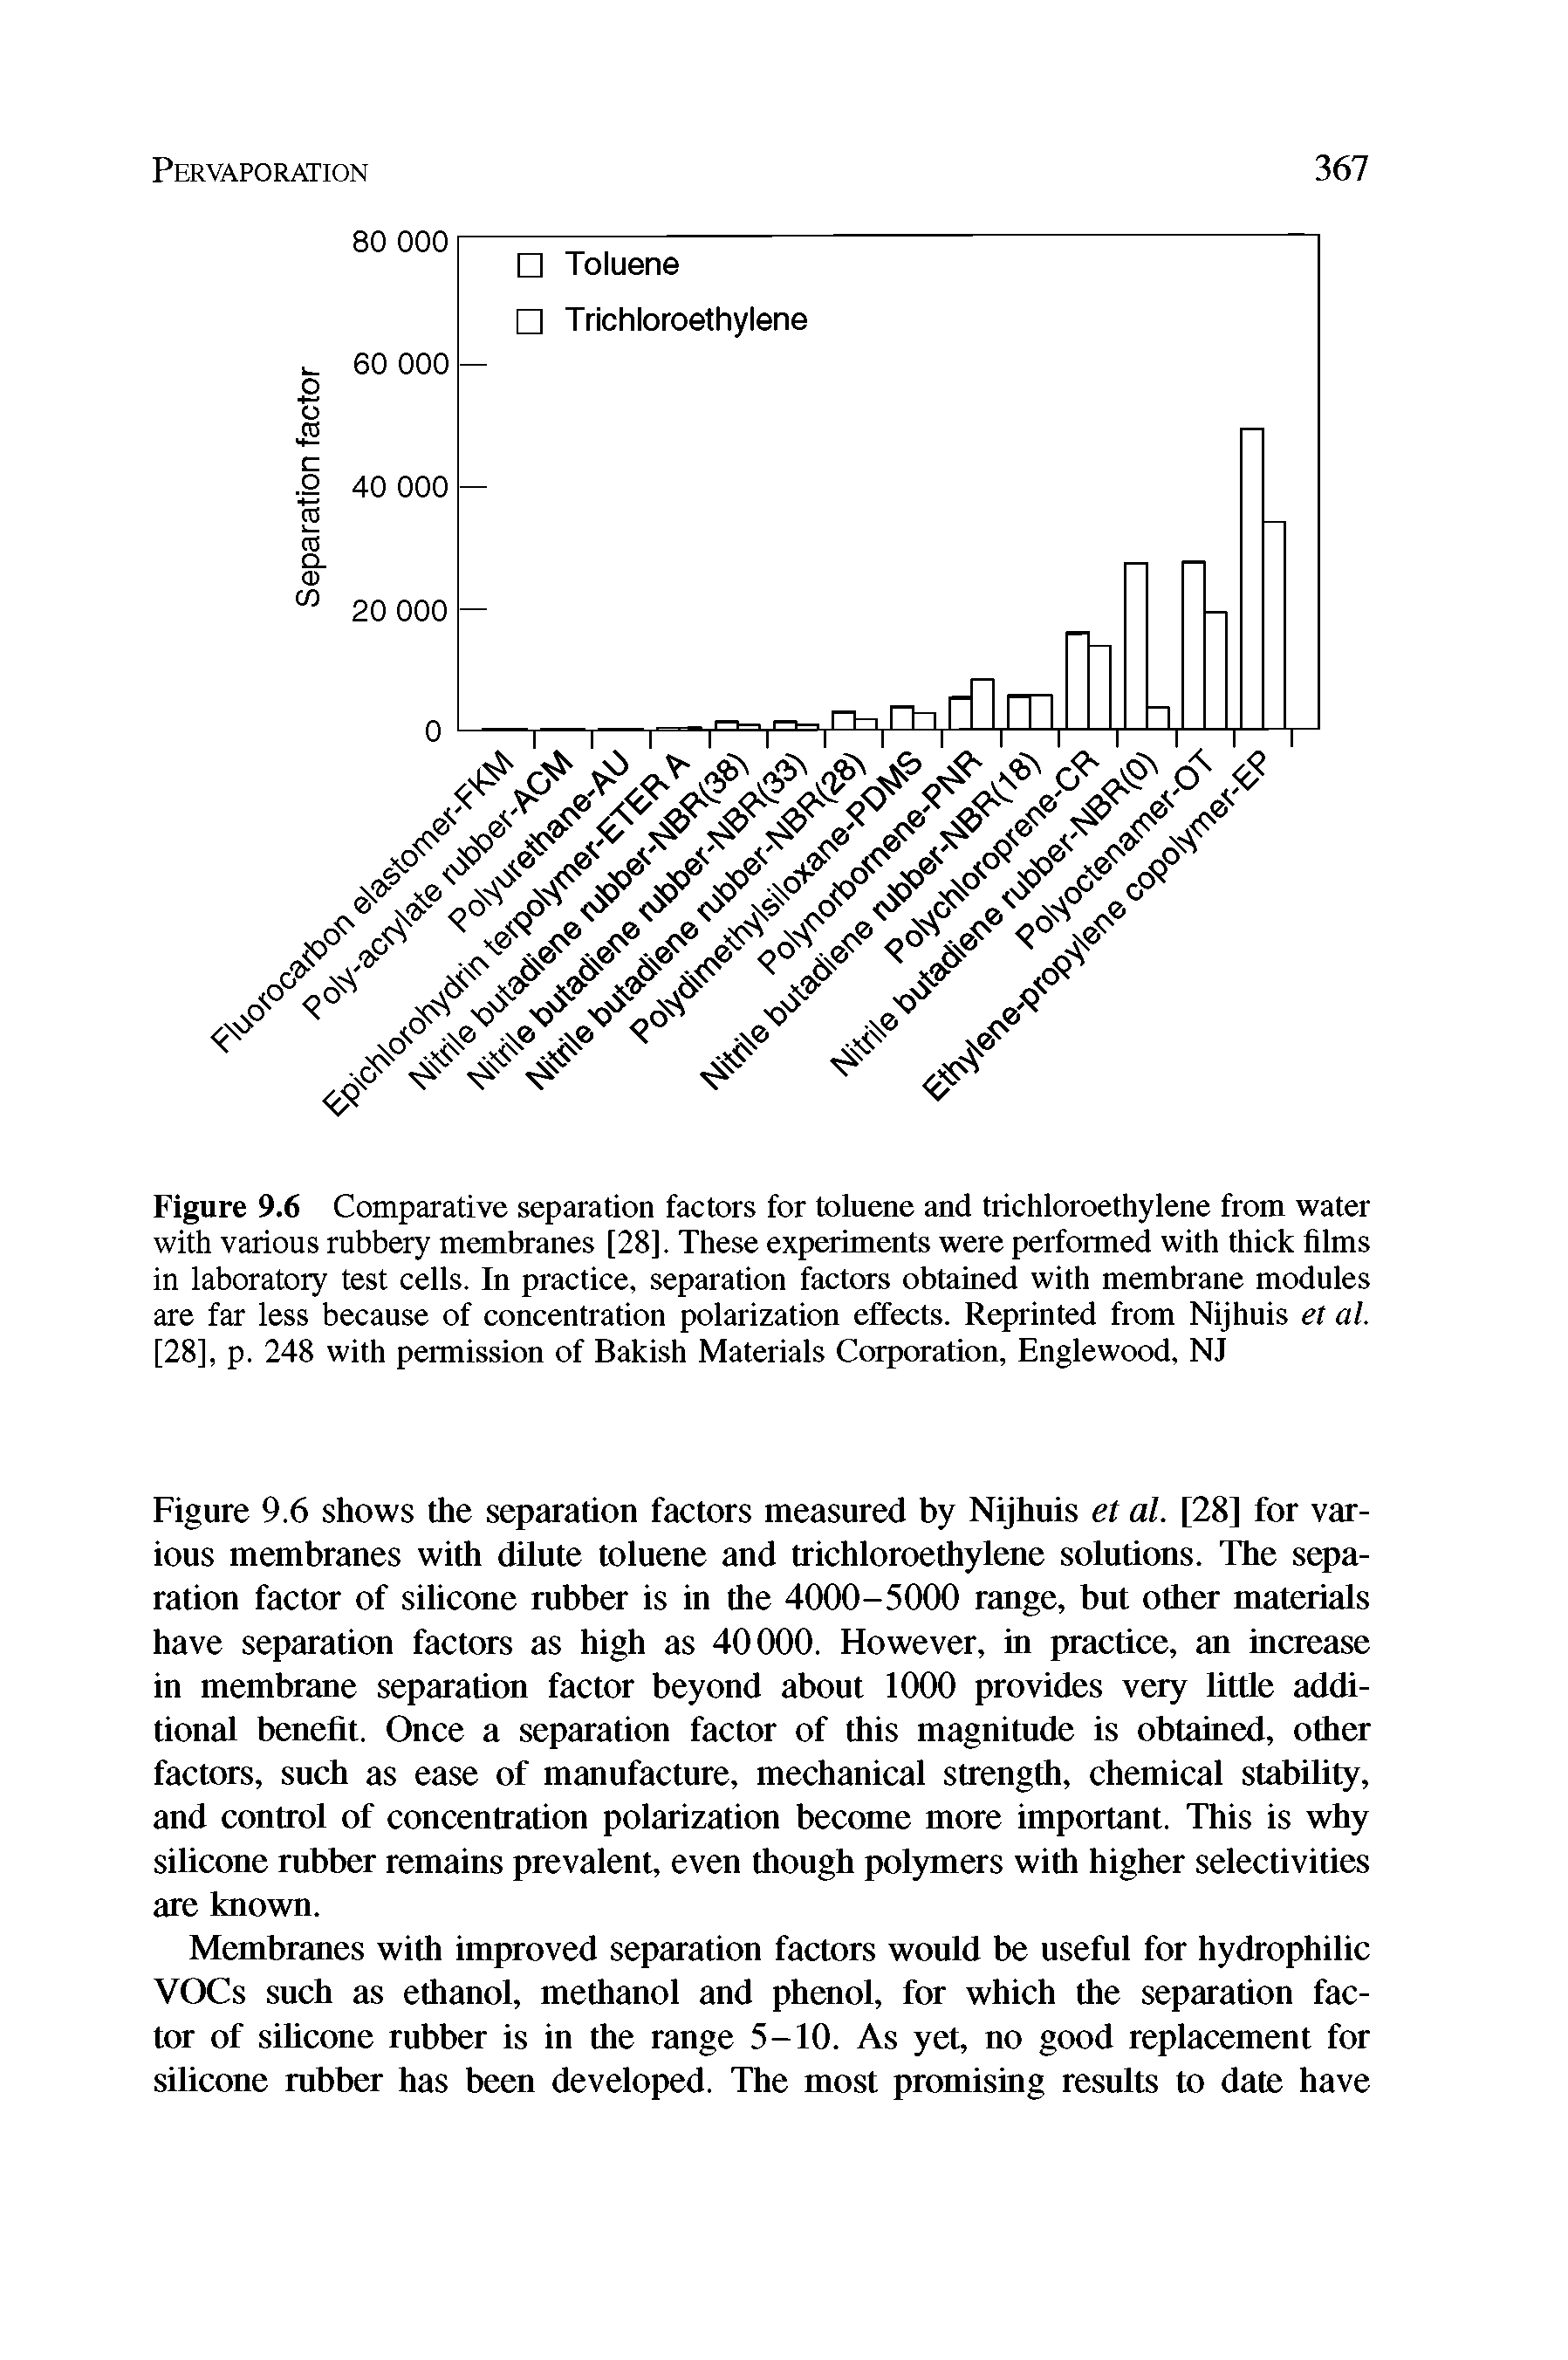 Figure 9.6 Comparative separation factors for toluene and trichloroethylene from water with various rubbery membranes [28]. These experiments were performed with thick films in laboratory test cells. In practice, separation factors obtained with membrane modules are far less because of concentration polarization effects. Reprinted from Nijhuis et al. [28], p. 248 with permission of Bakish Materials Corporation, Englewood, NJ...